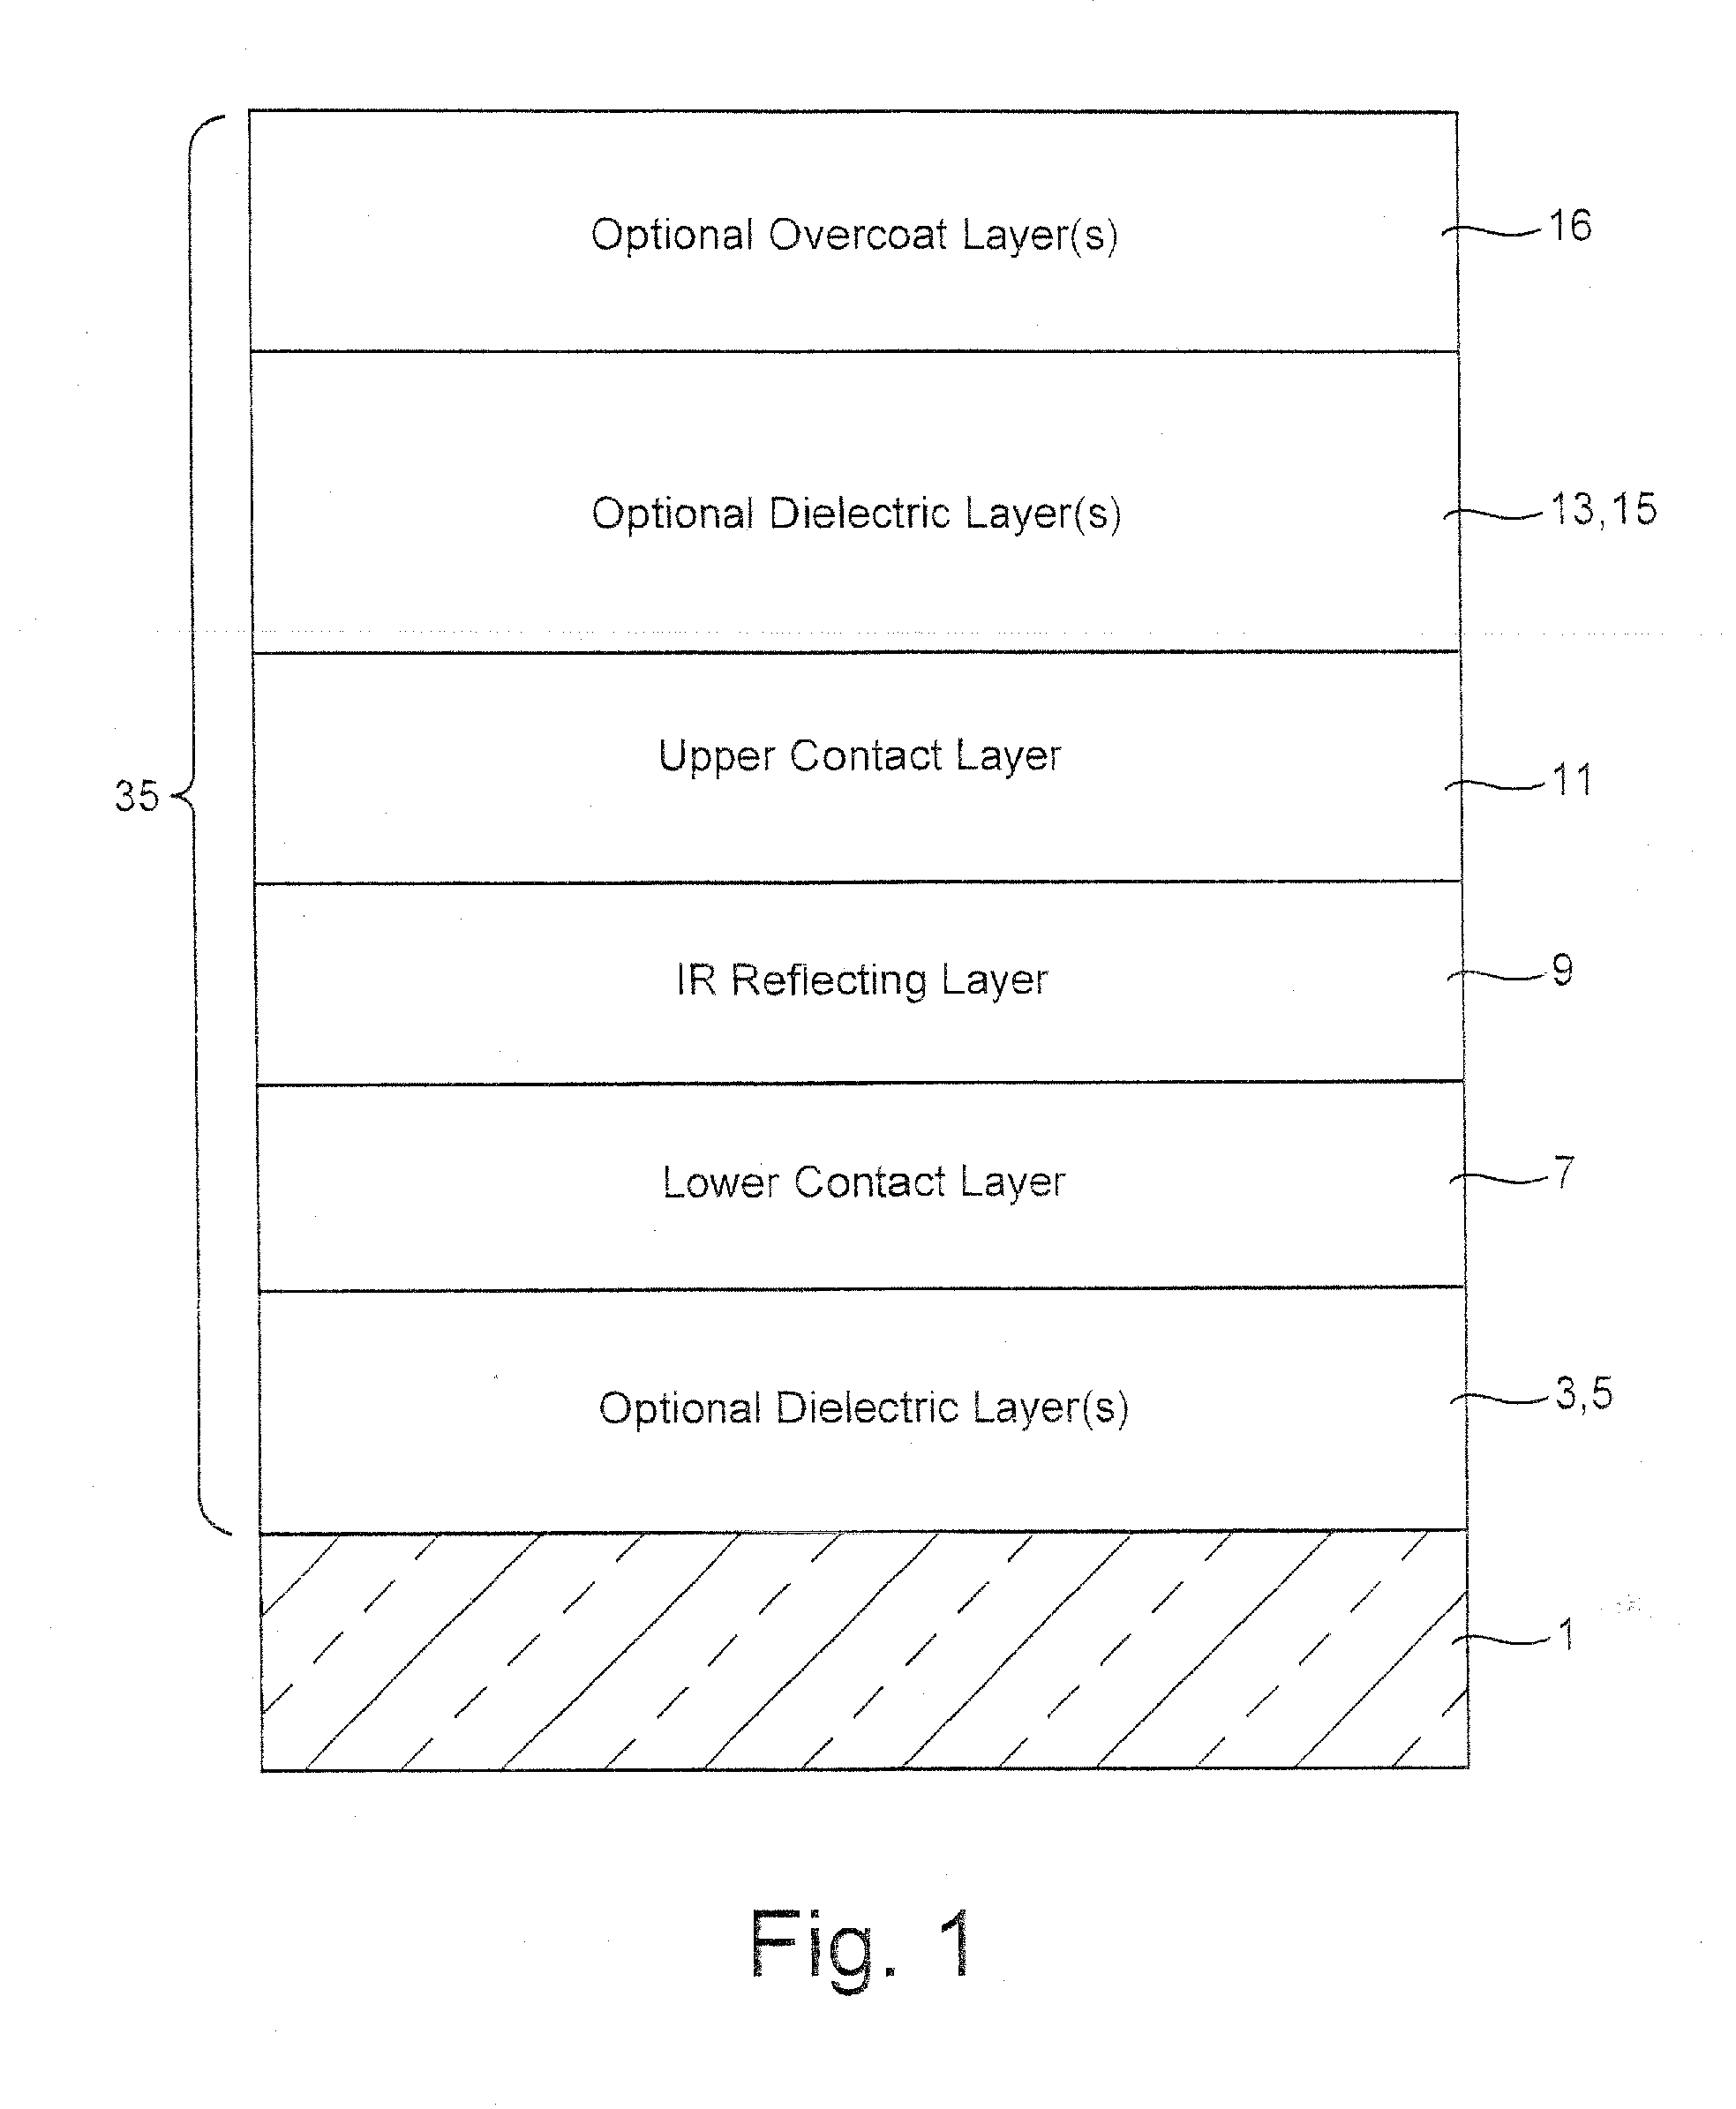 Coated article including low-emissivity coating insulating glass unit including coated article, and/or methods of making the same